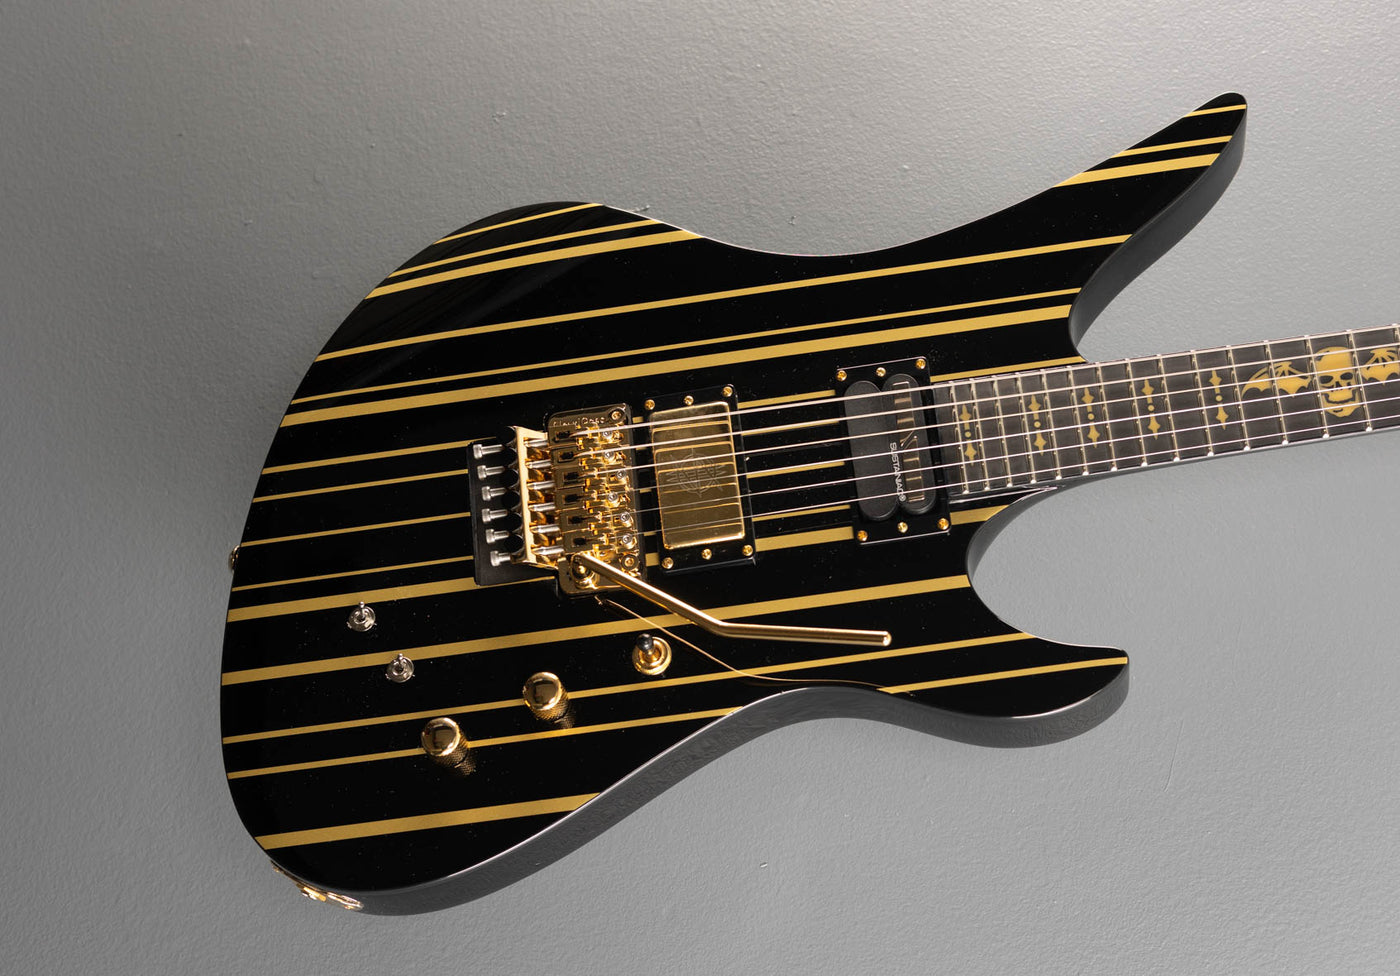 Synyster Custom-S - Gloss Black with Gold Pinstripes